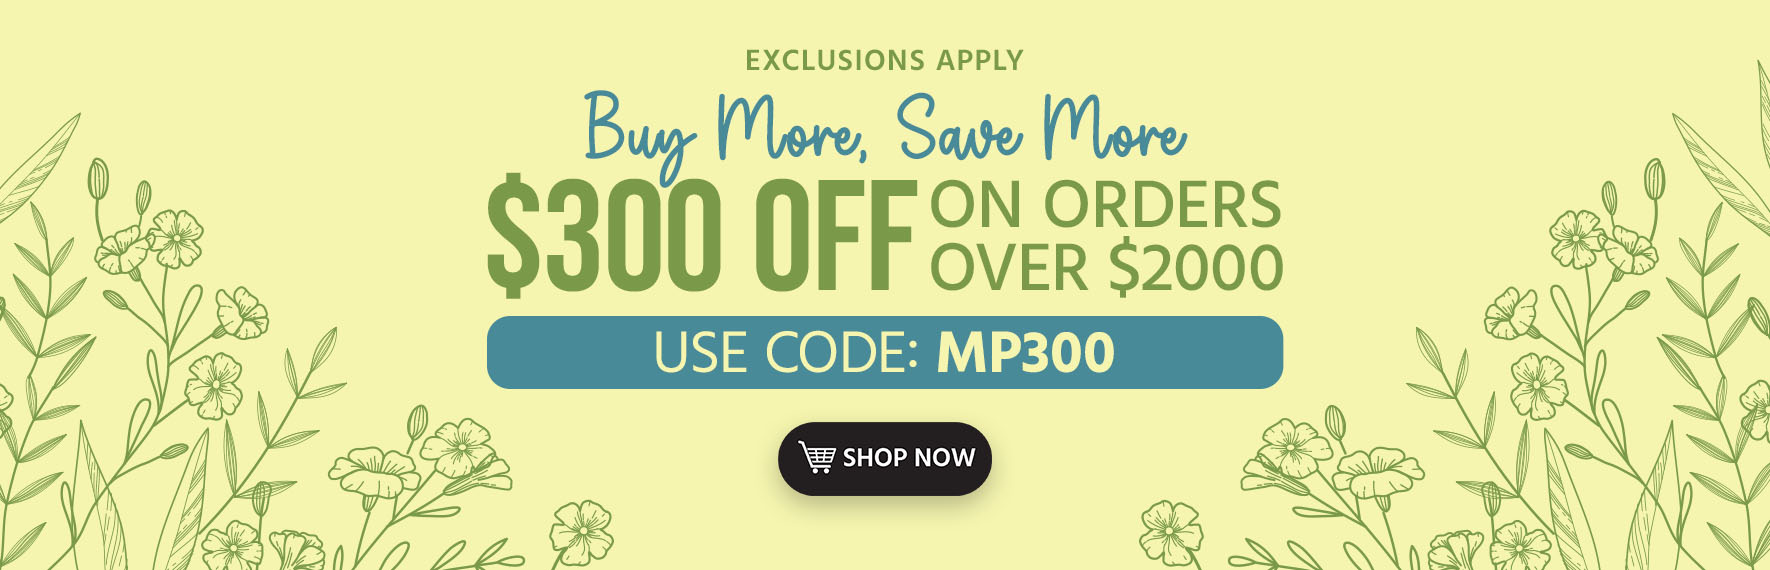 Buy More, Save More $300 off on orders over $2000 Use Code: MP300 Exclusions Apply Shop Now